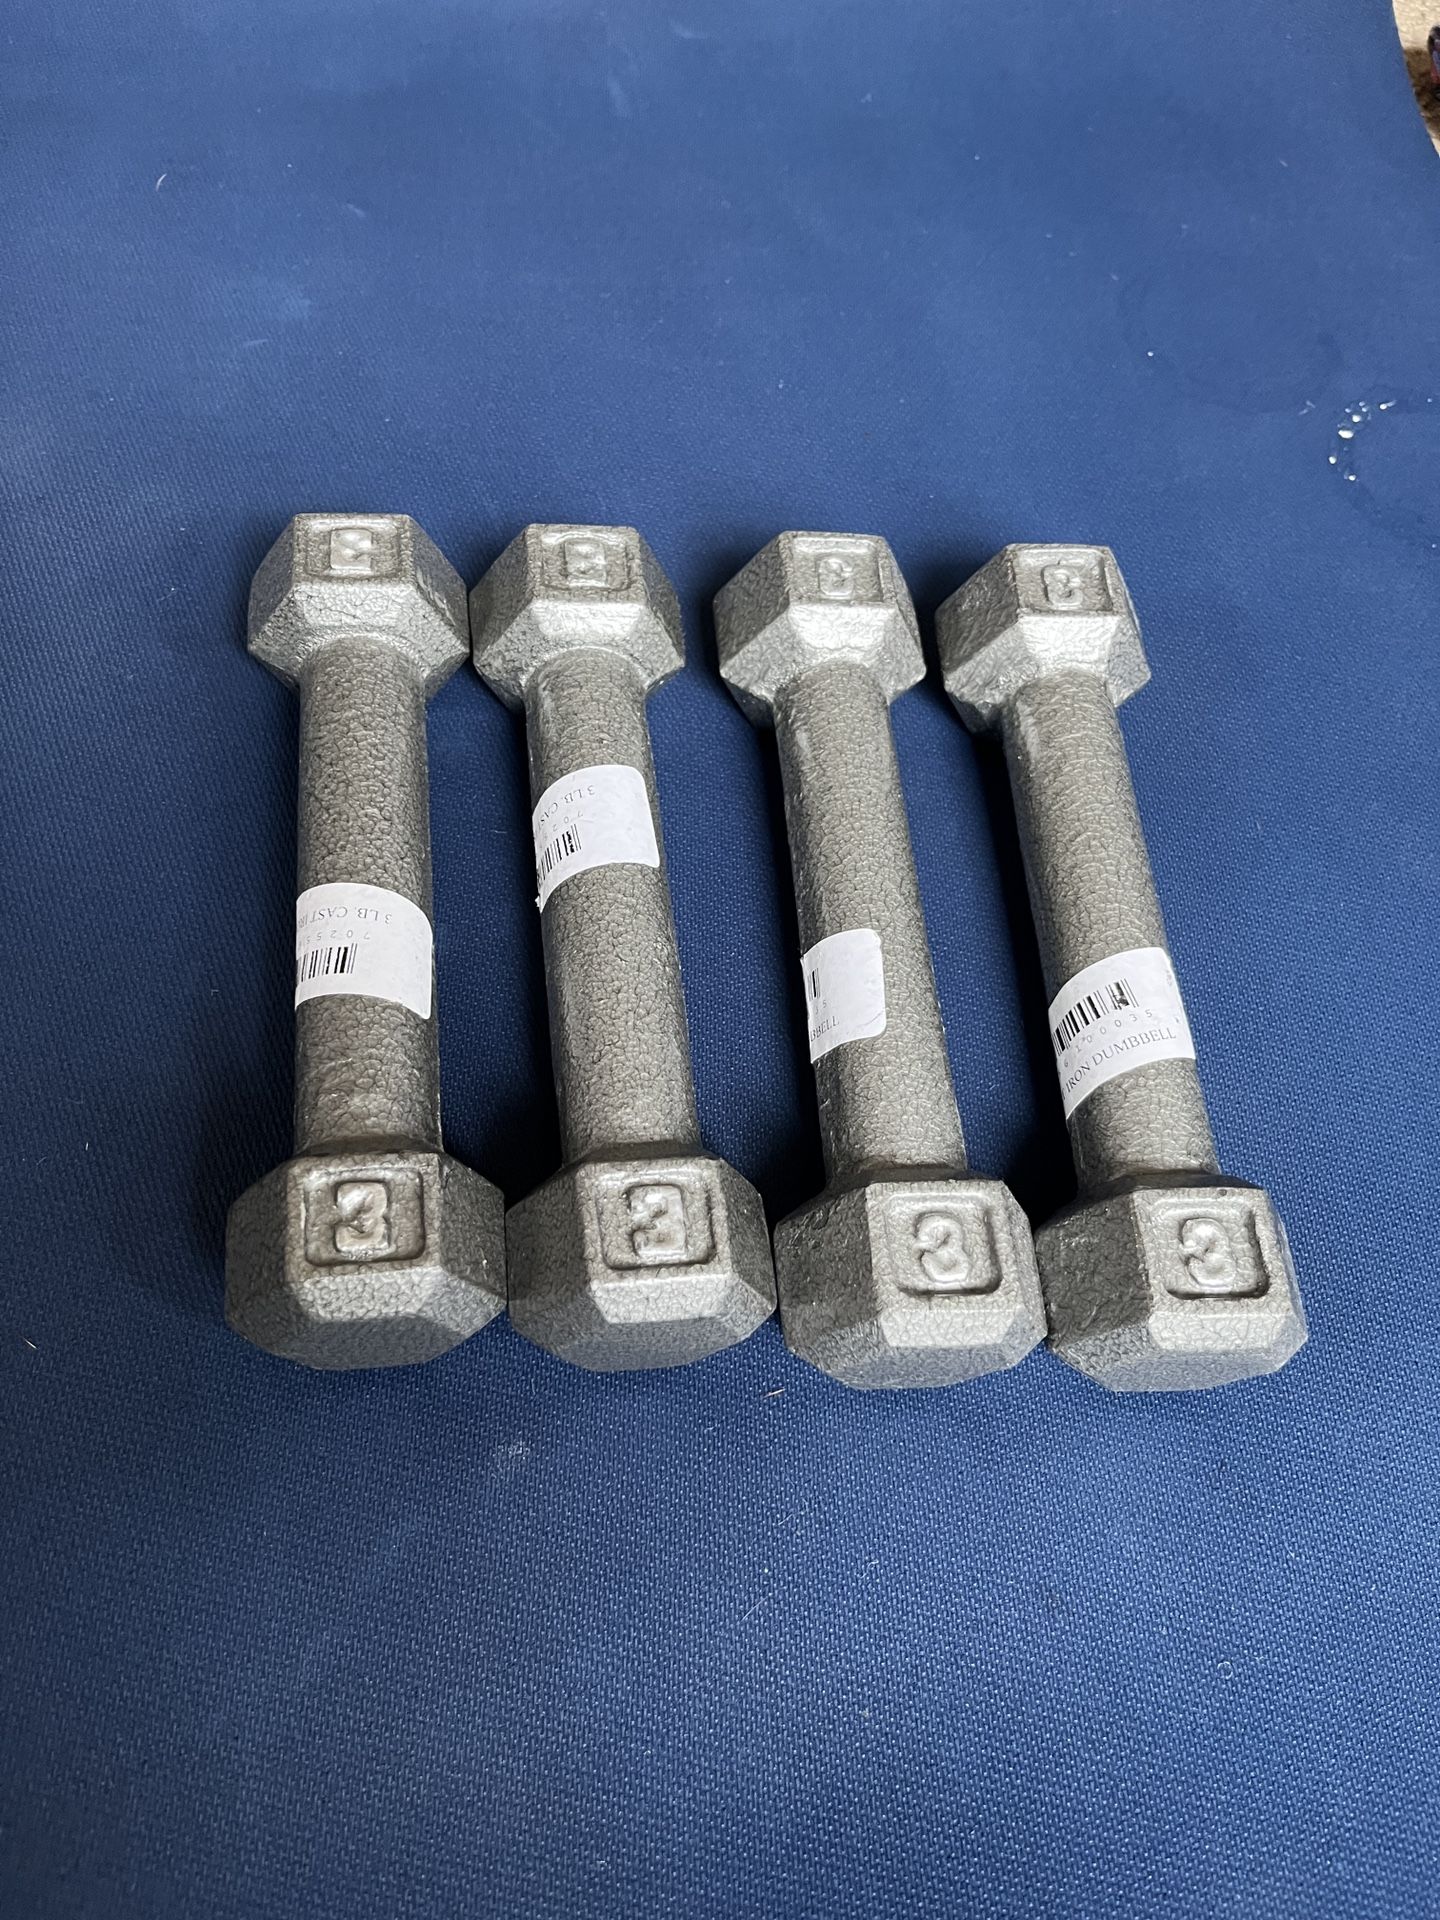 Hand Weights 3 Lb